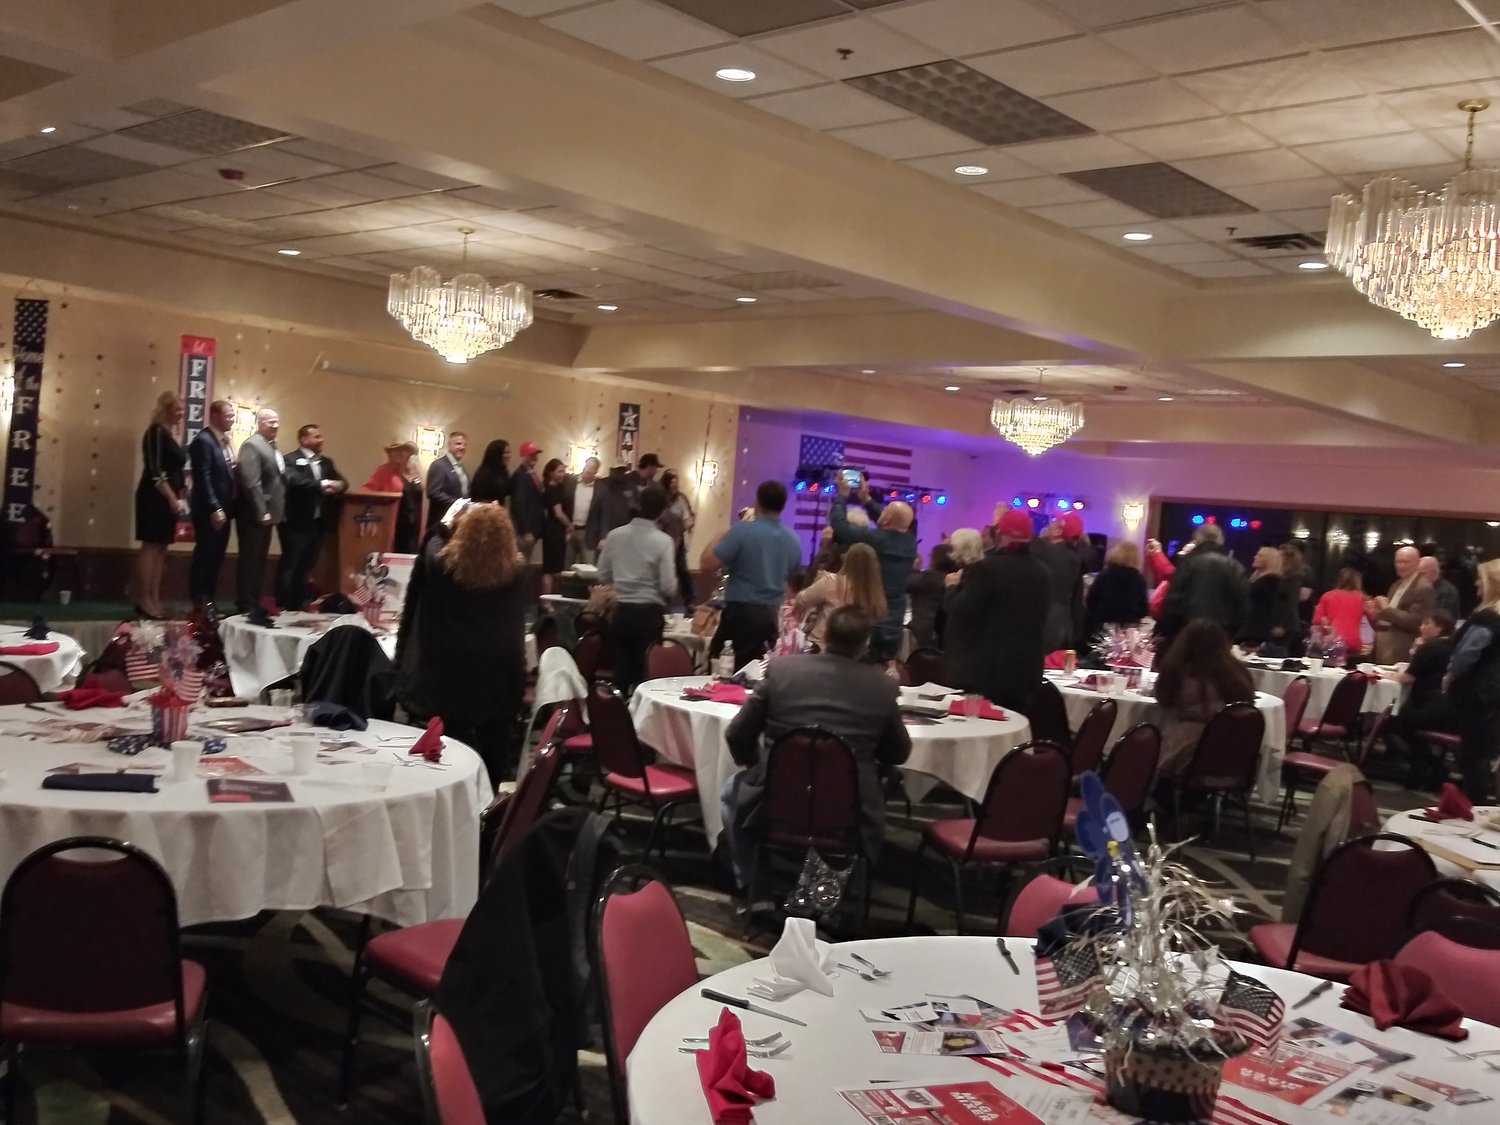 The end of the MAGA Mixer featured all of the candidates for state office who have been endorsed by former President Donald Trump. The event was heavy on security, including at least one security officer with a gun in his waistline.